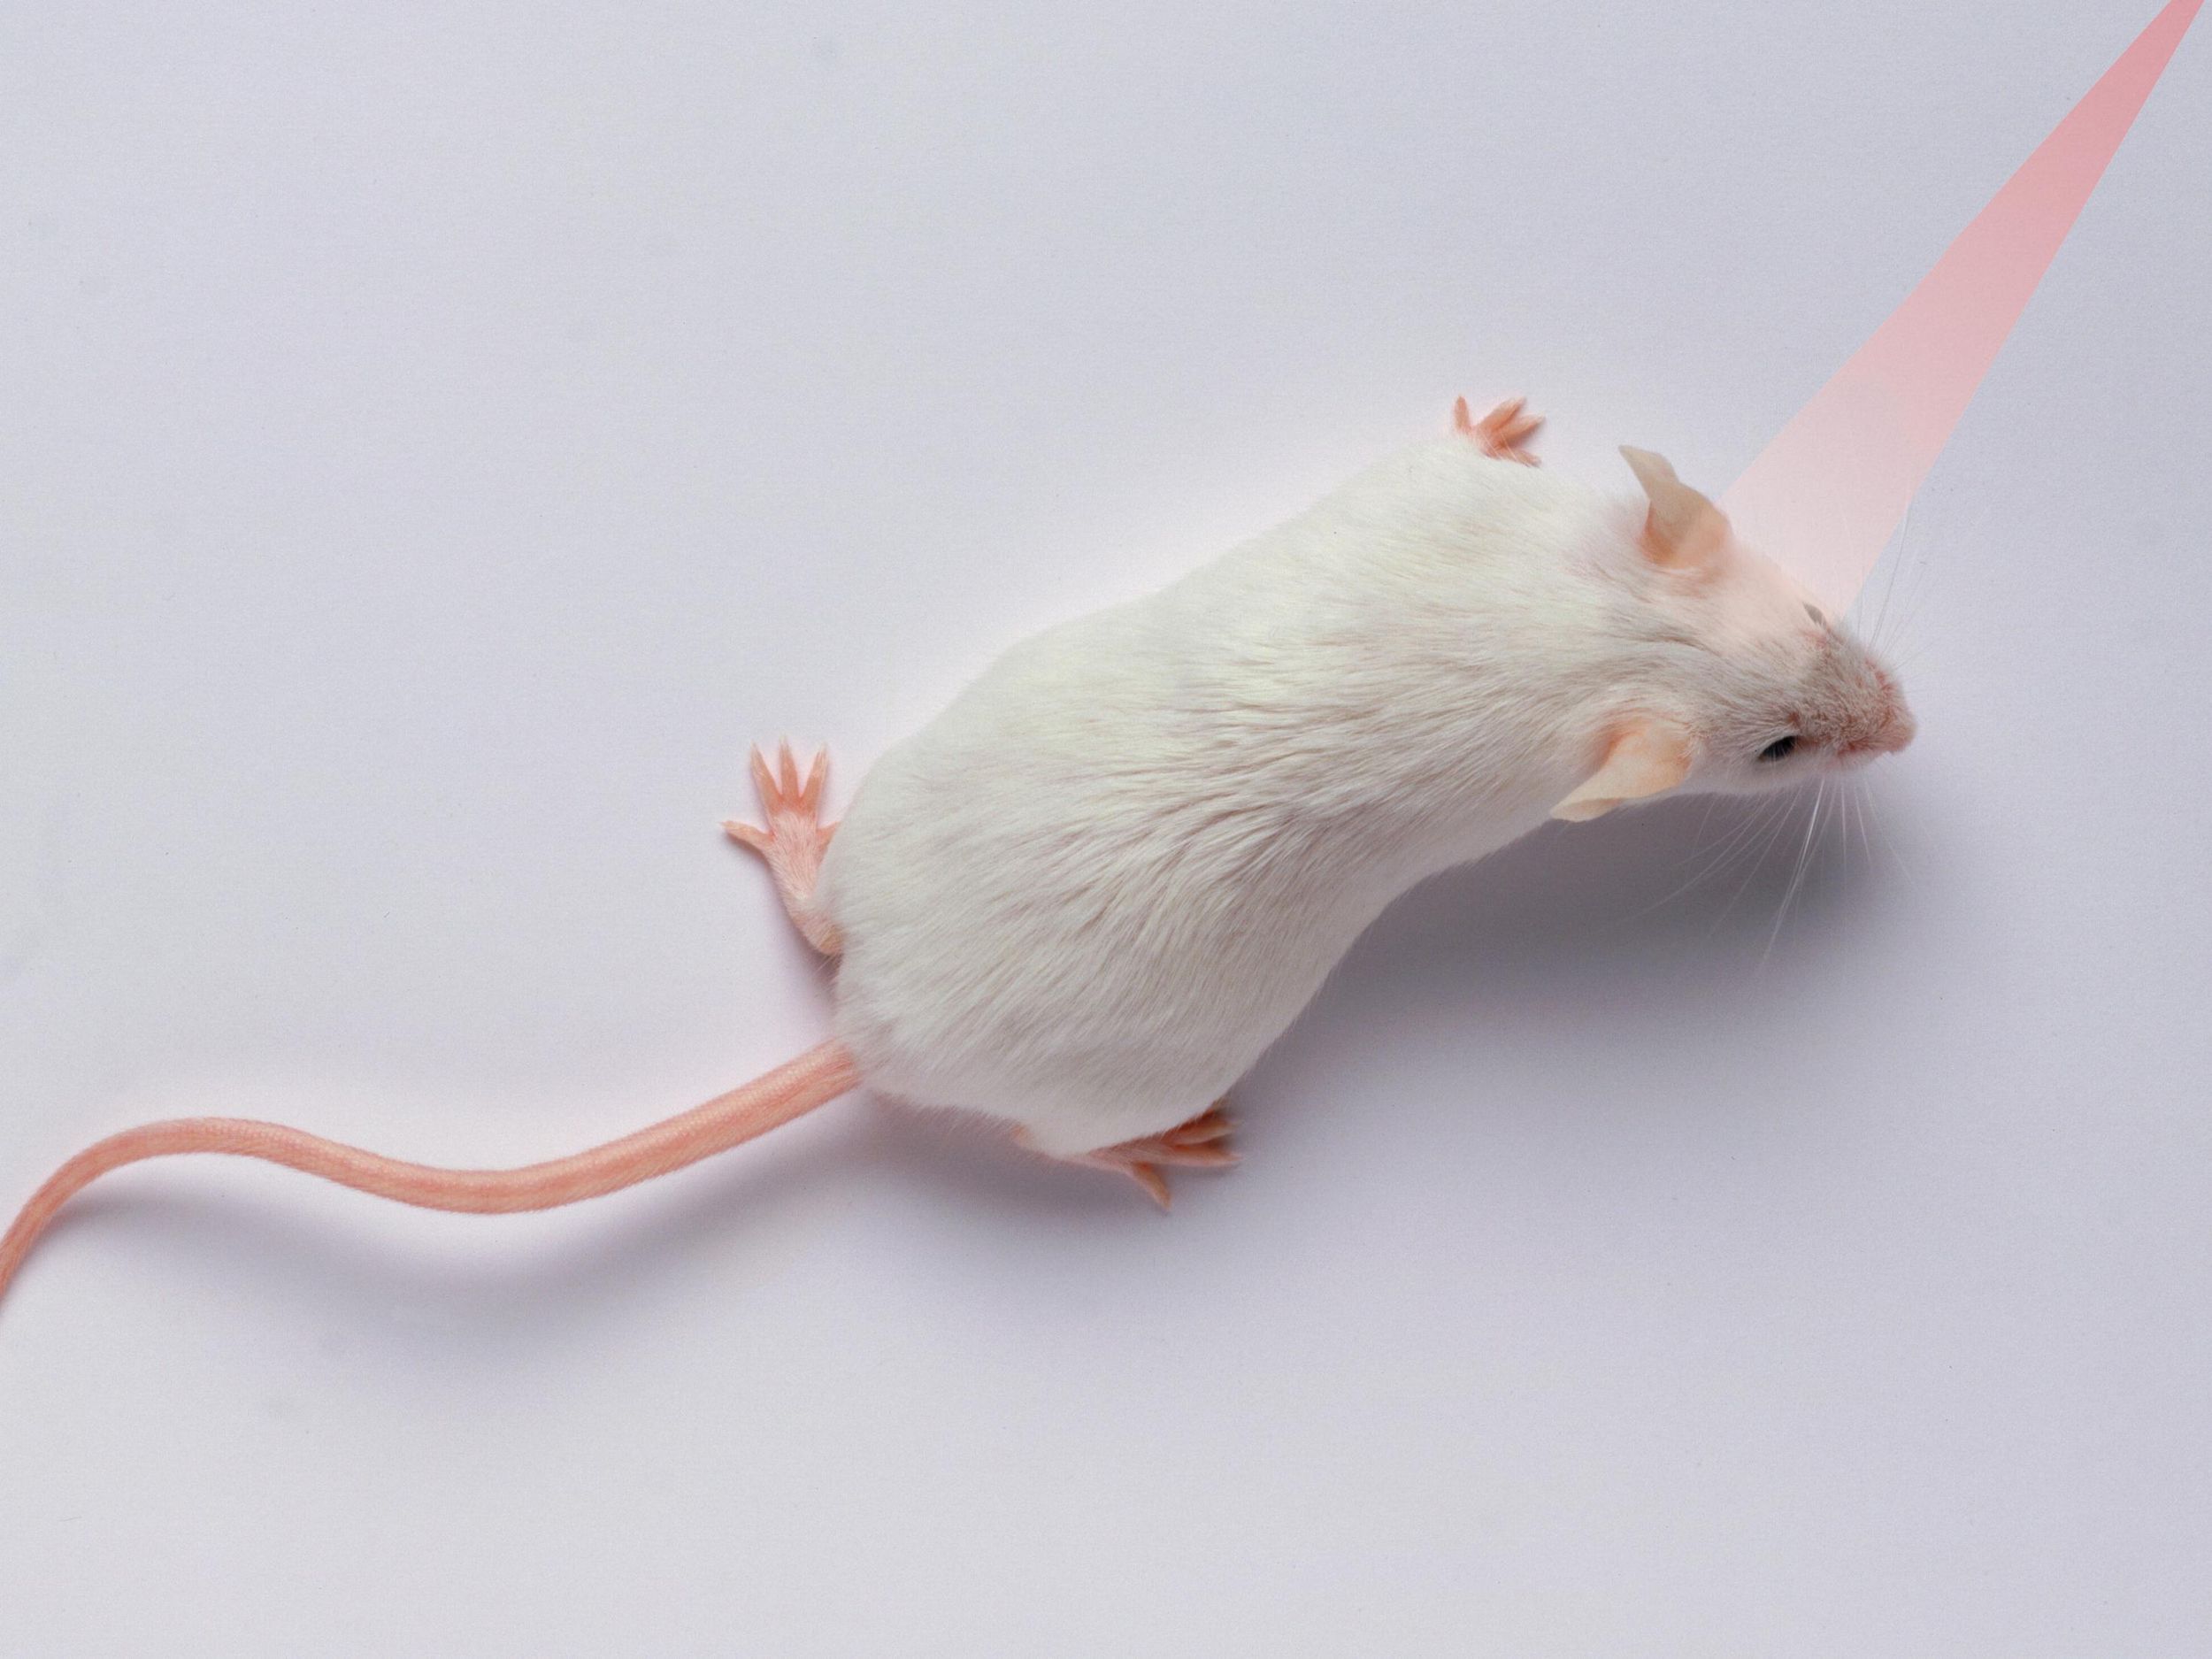 Photo of a mouse from above. A photoshopped pink beam of light is directed at the mouse's head.